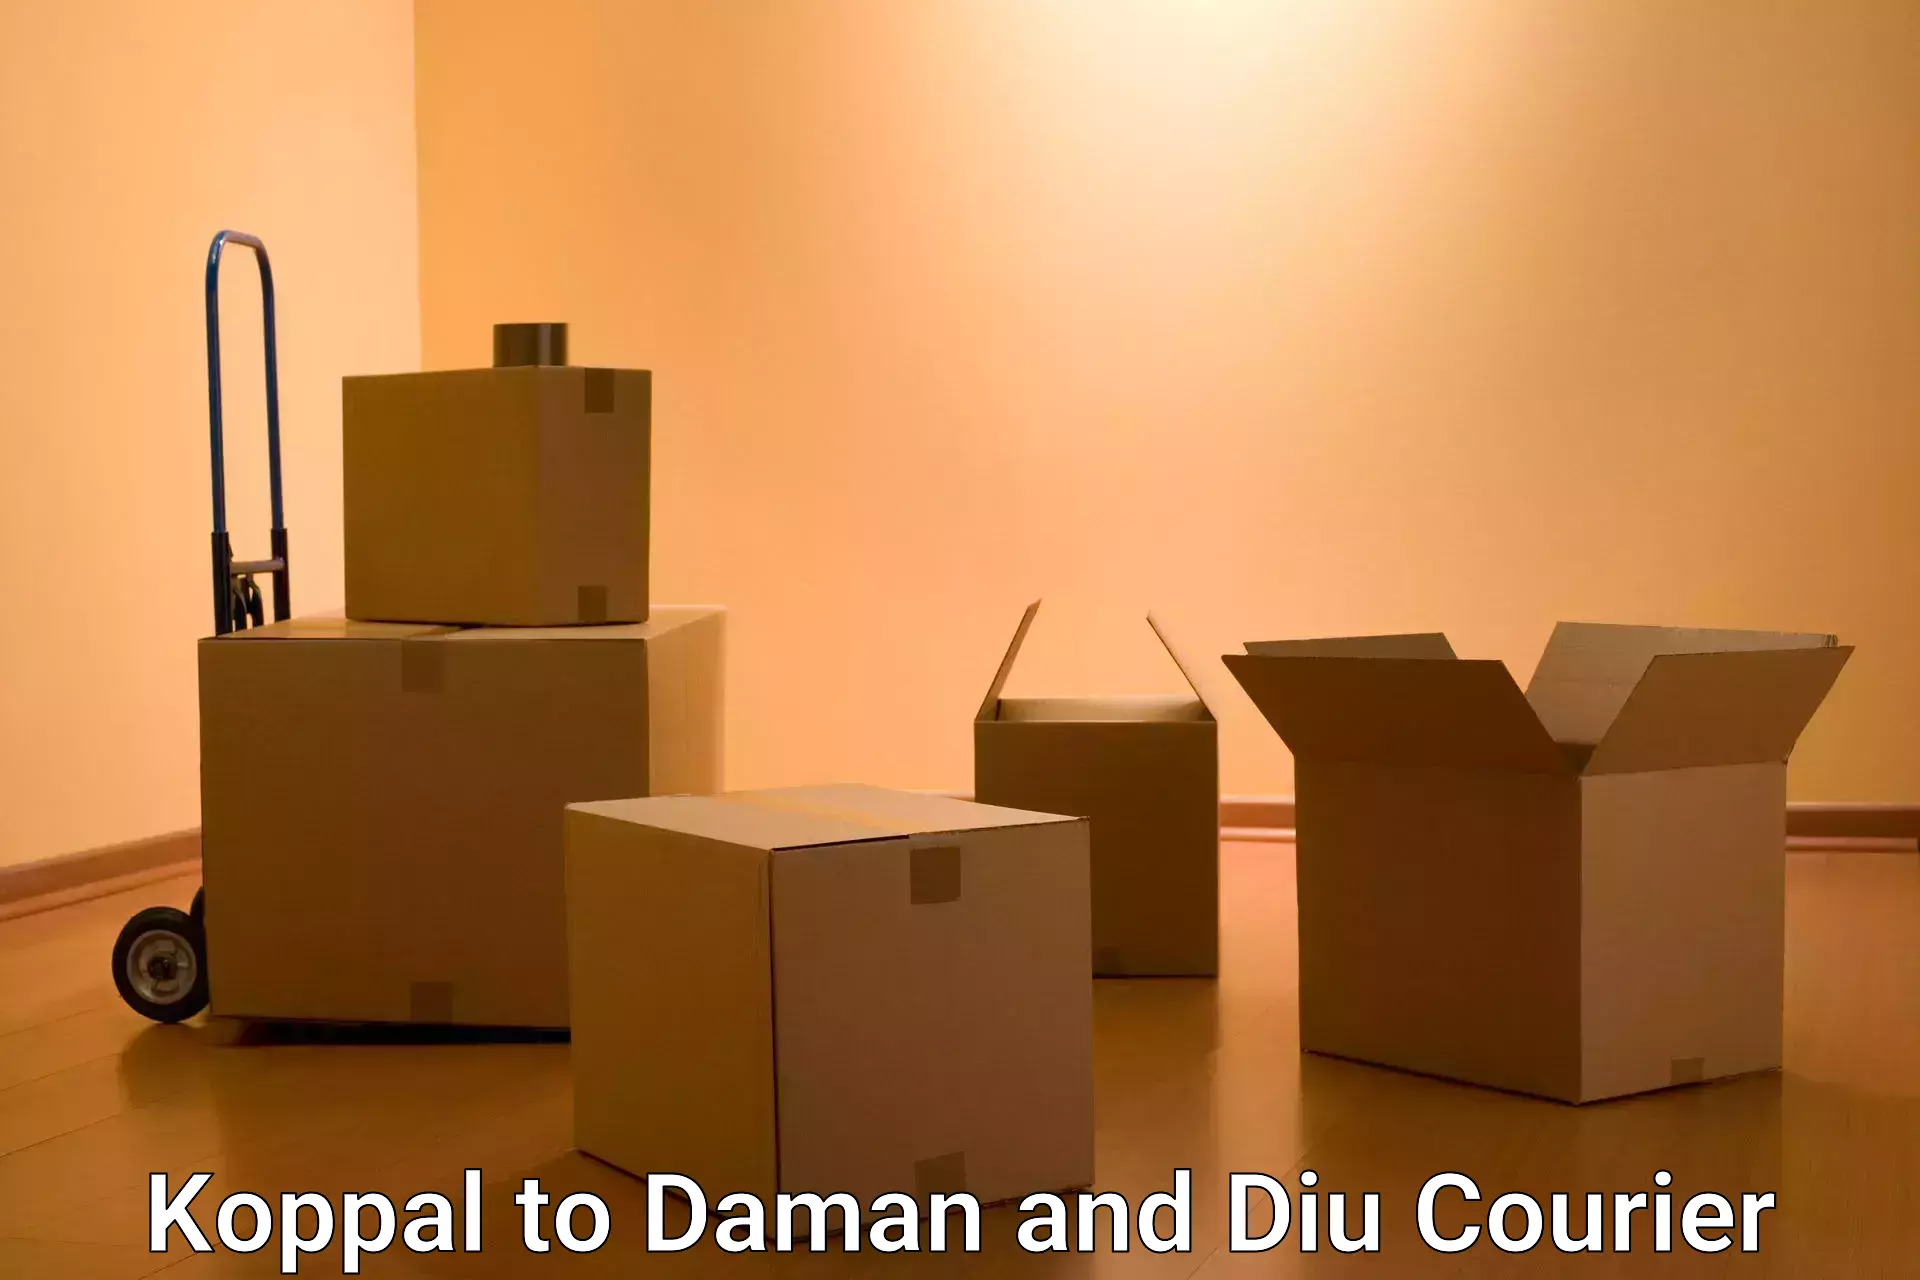 Next-day delivery options in Koppal to Daman and Diu